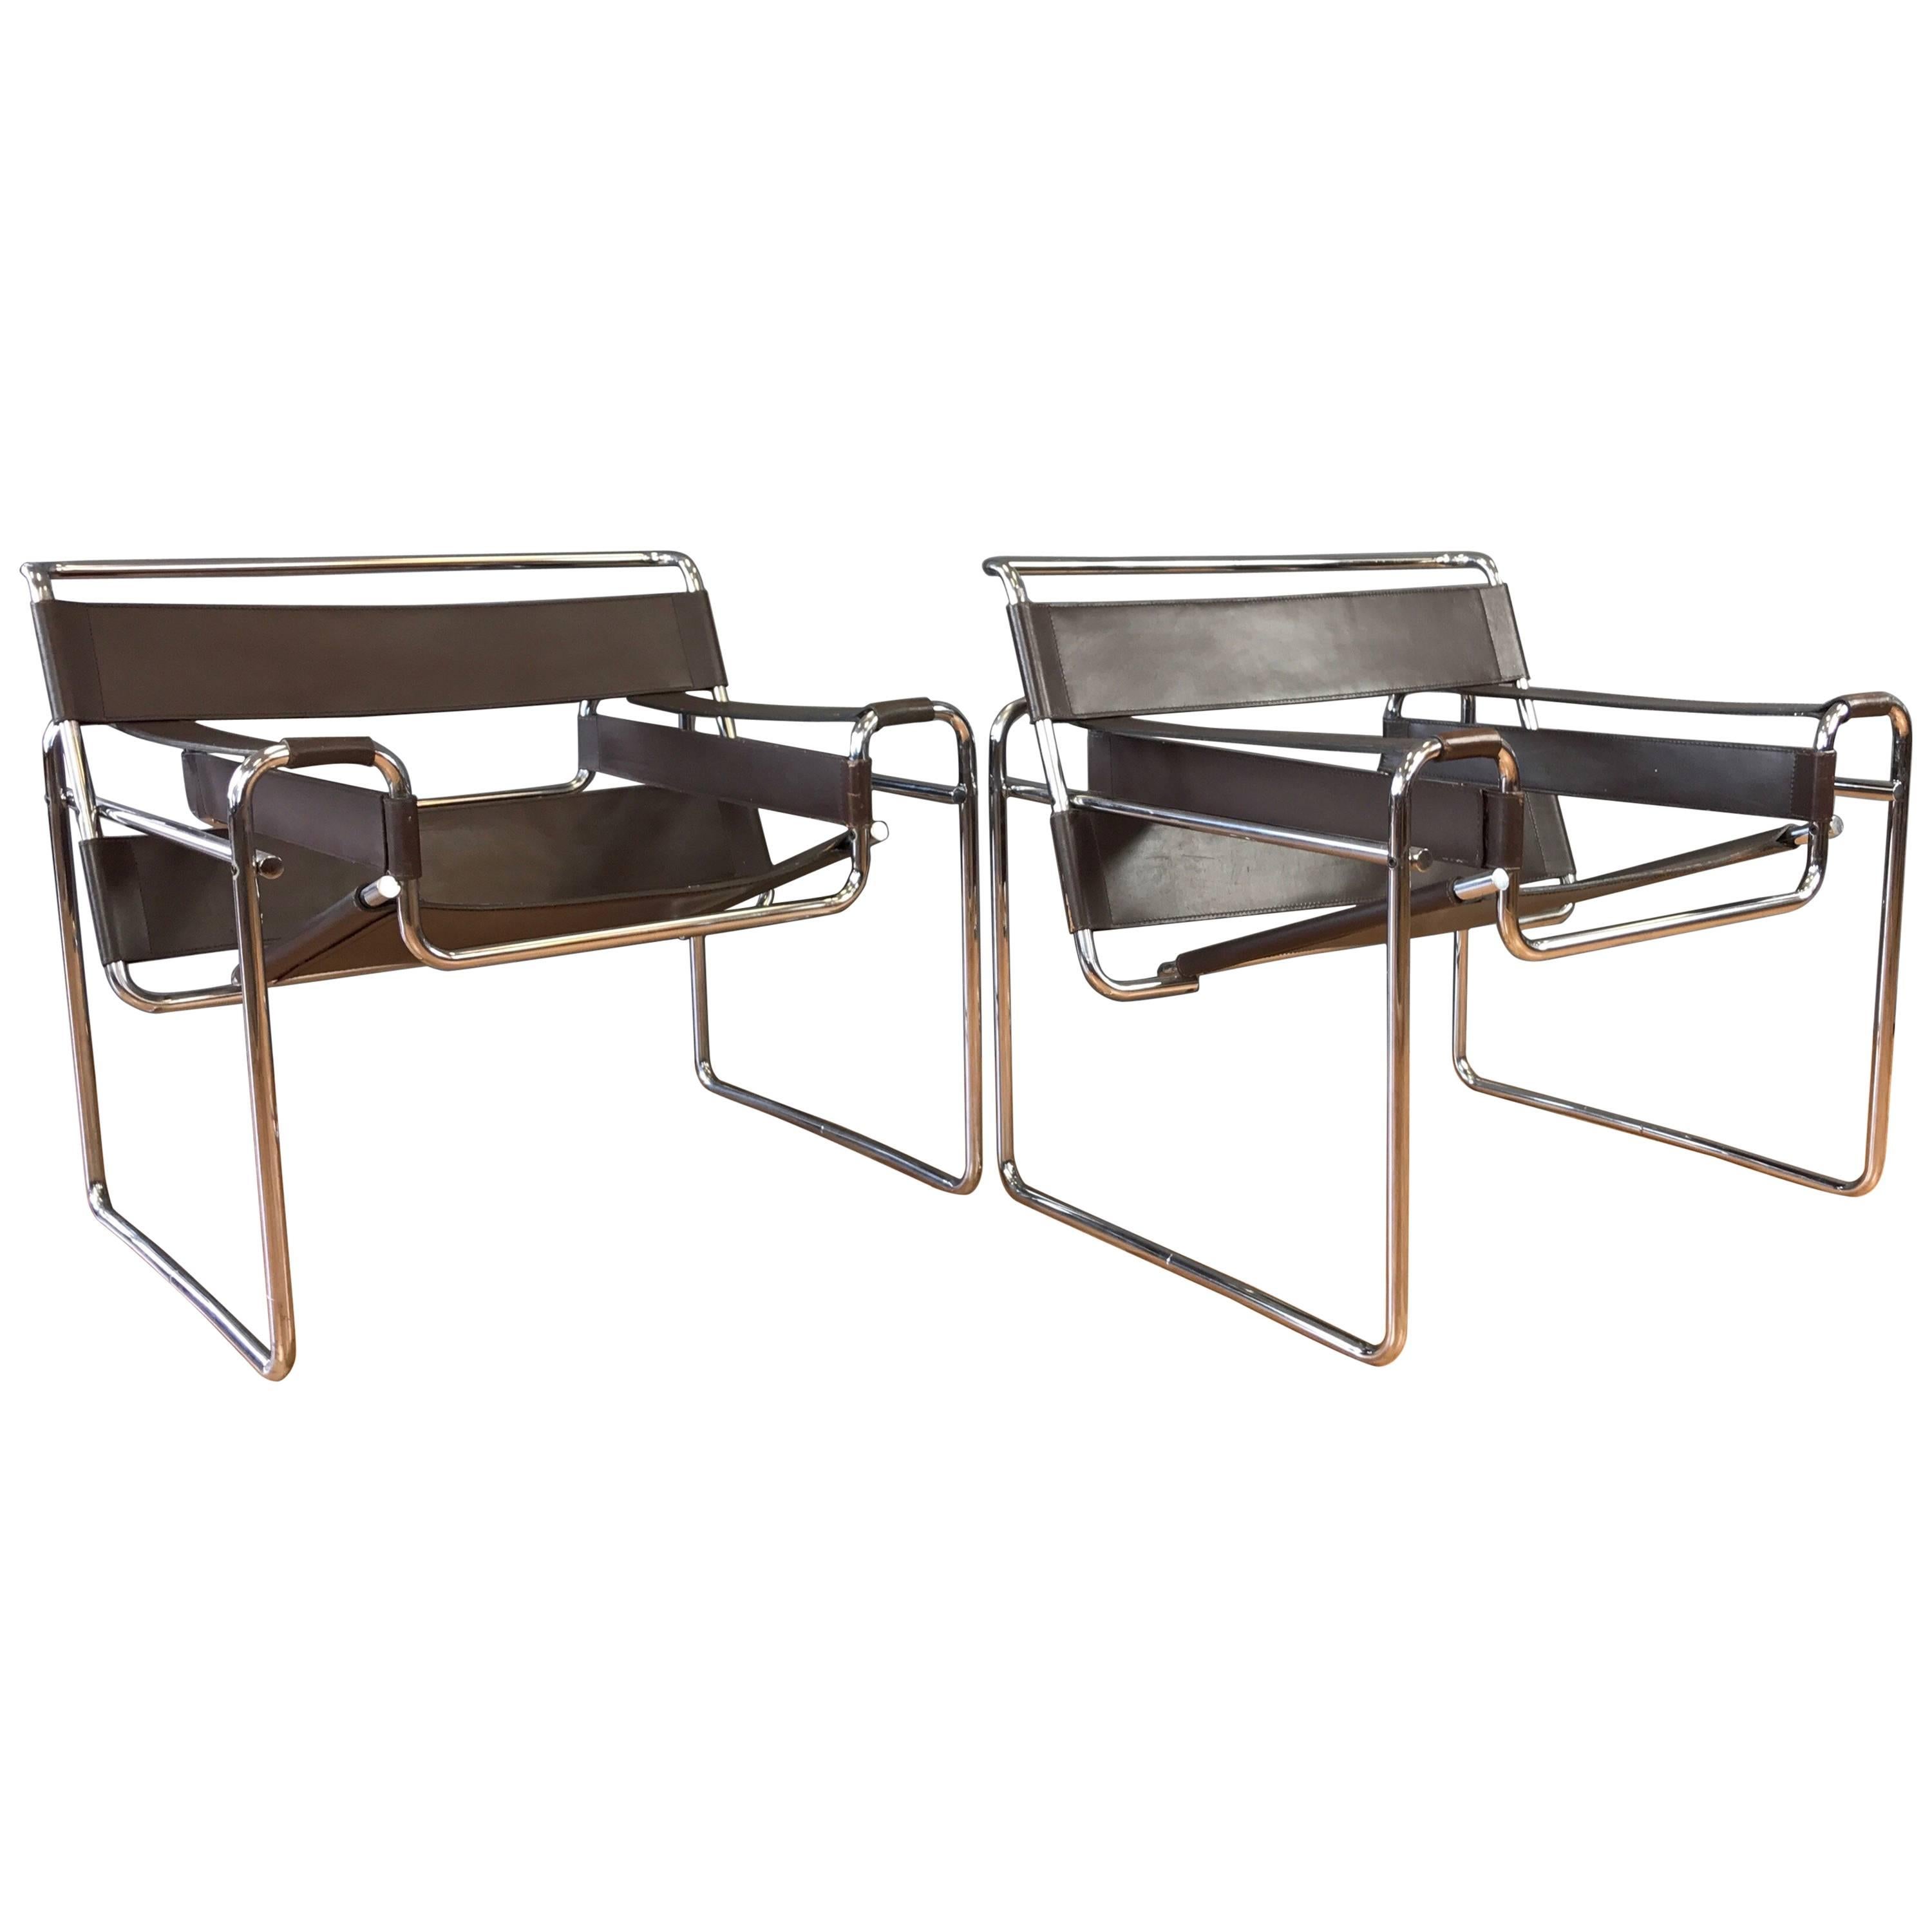 Pair of Vintage Marcel Breuer “Wassily” Chairs by Gavina for Knoll